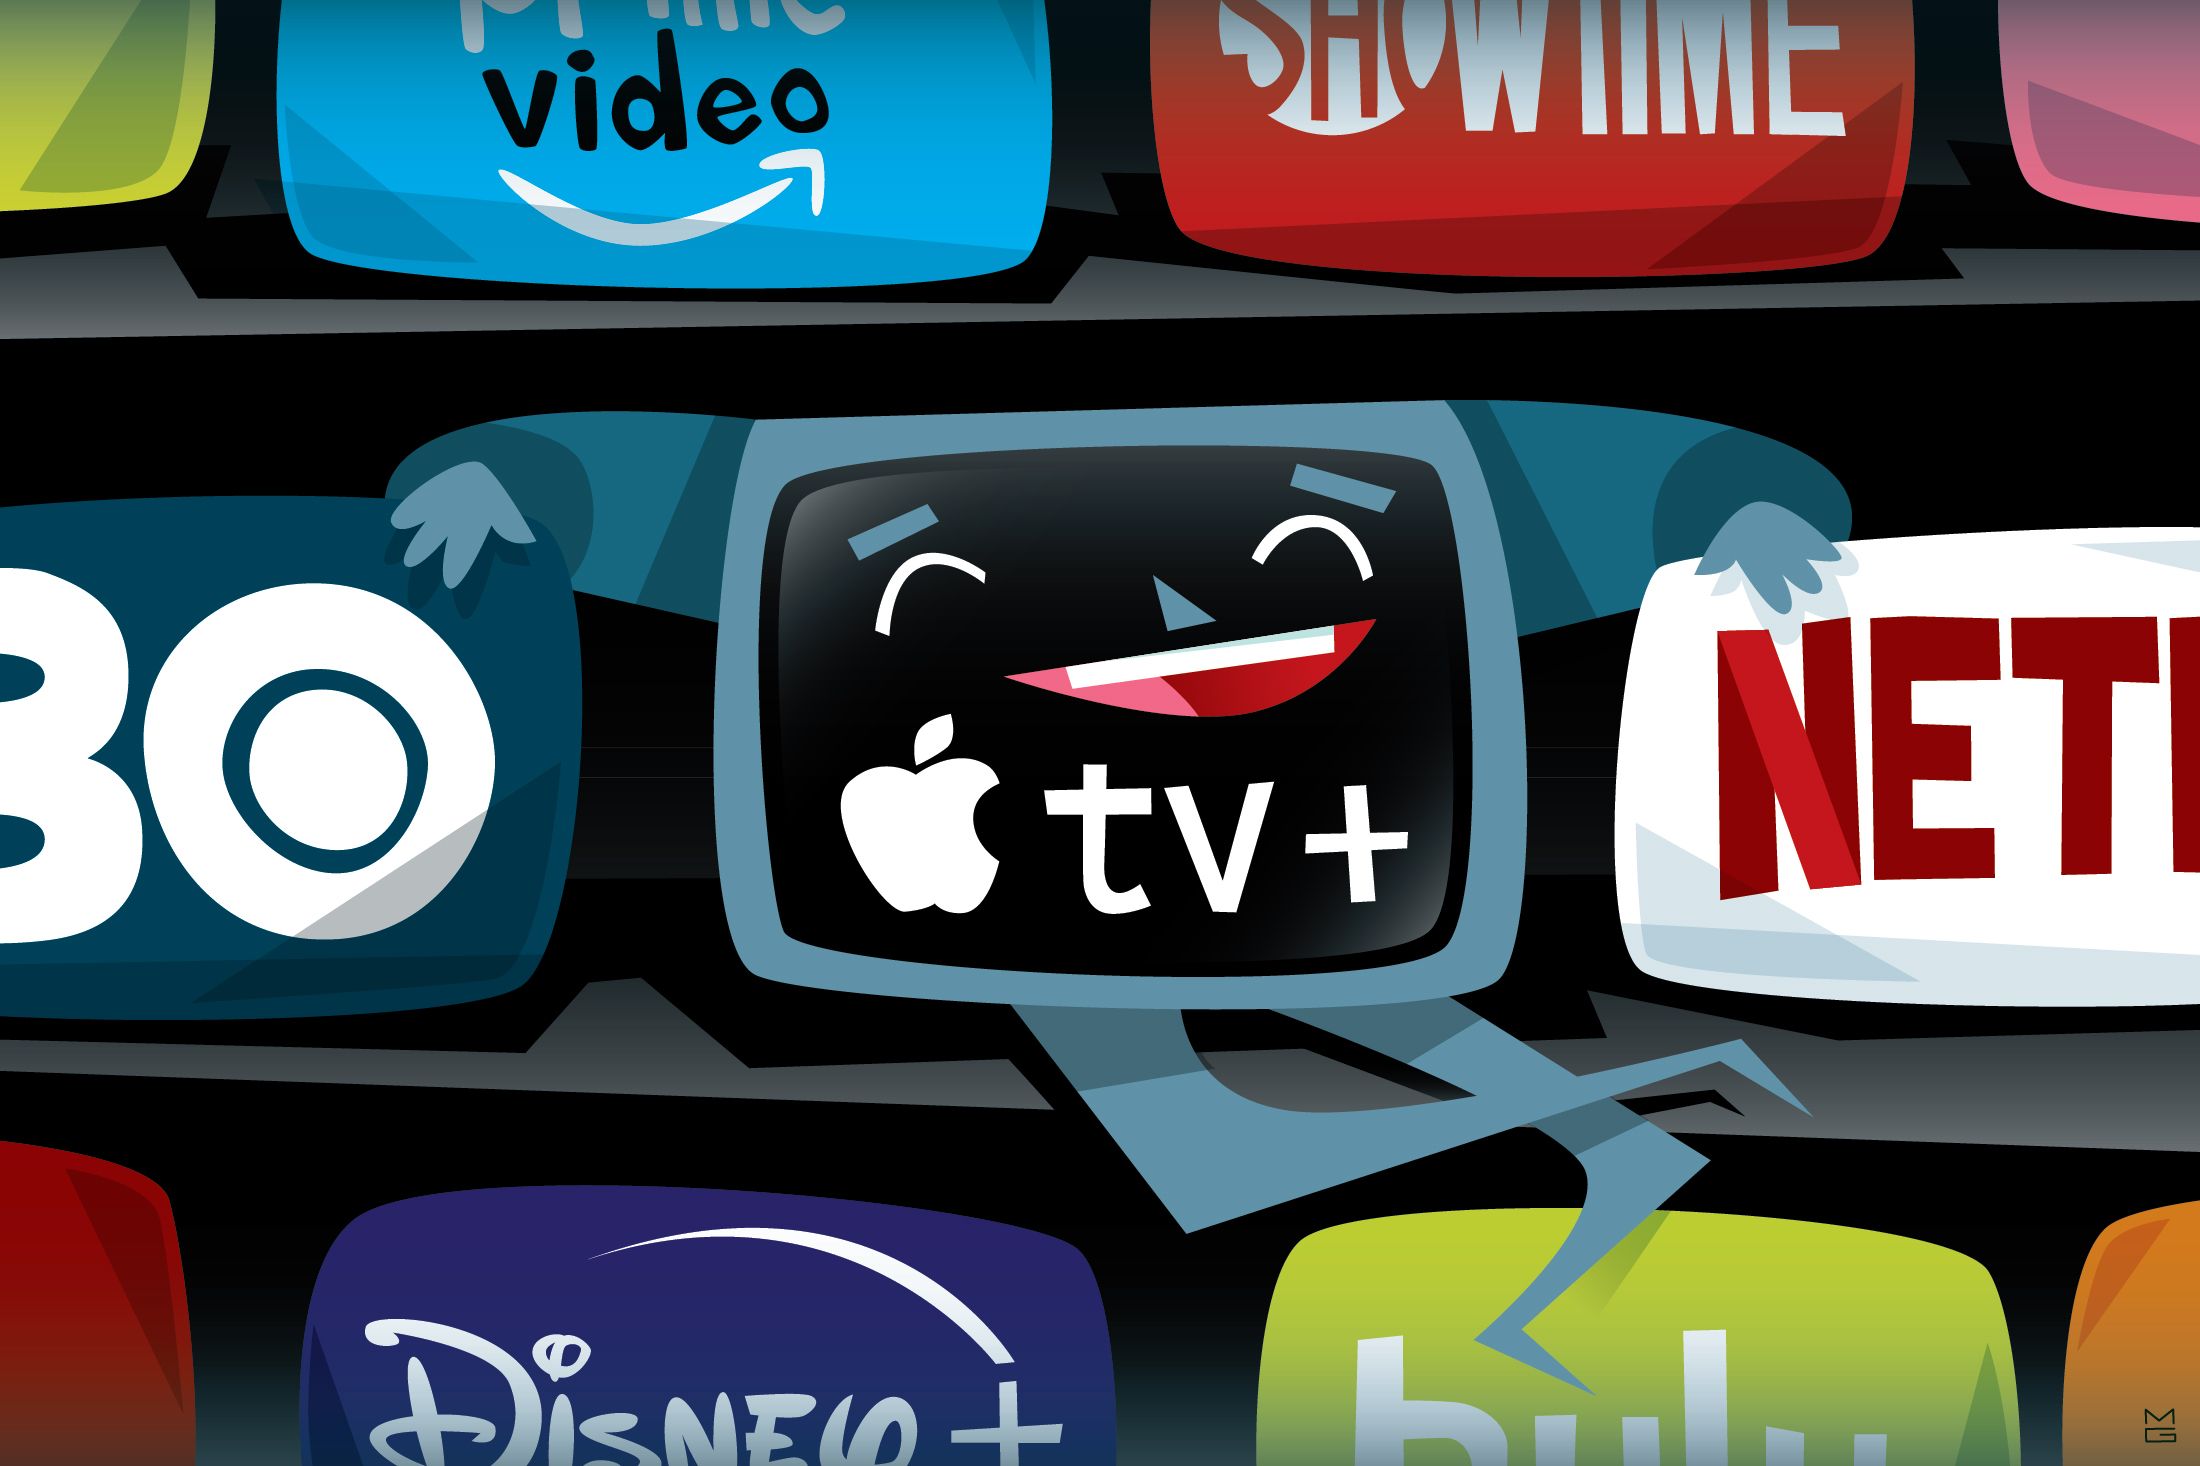 Ubevæbnet privat Bliv sammenfiltret What Is Apple TV Plus? And Why Is Apple Making TV Shows?